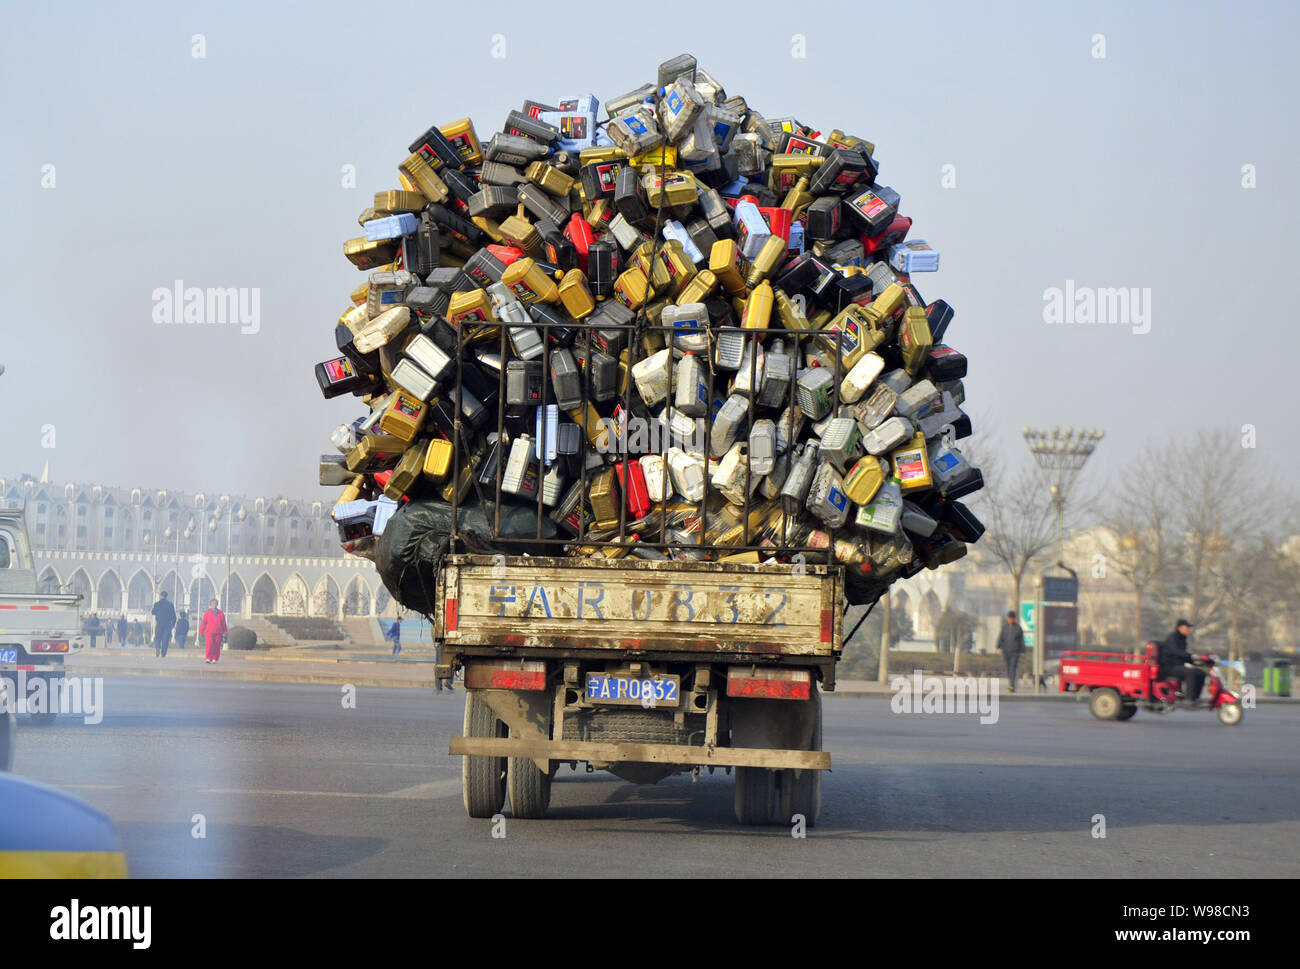 Truck overloaded with plastic containers - Stock Image - C047/7908 -  Science Photo Library